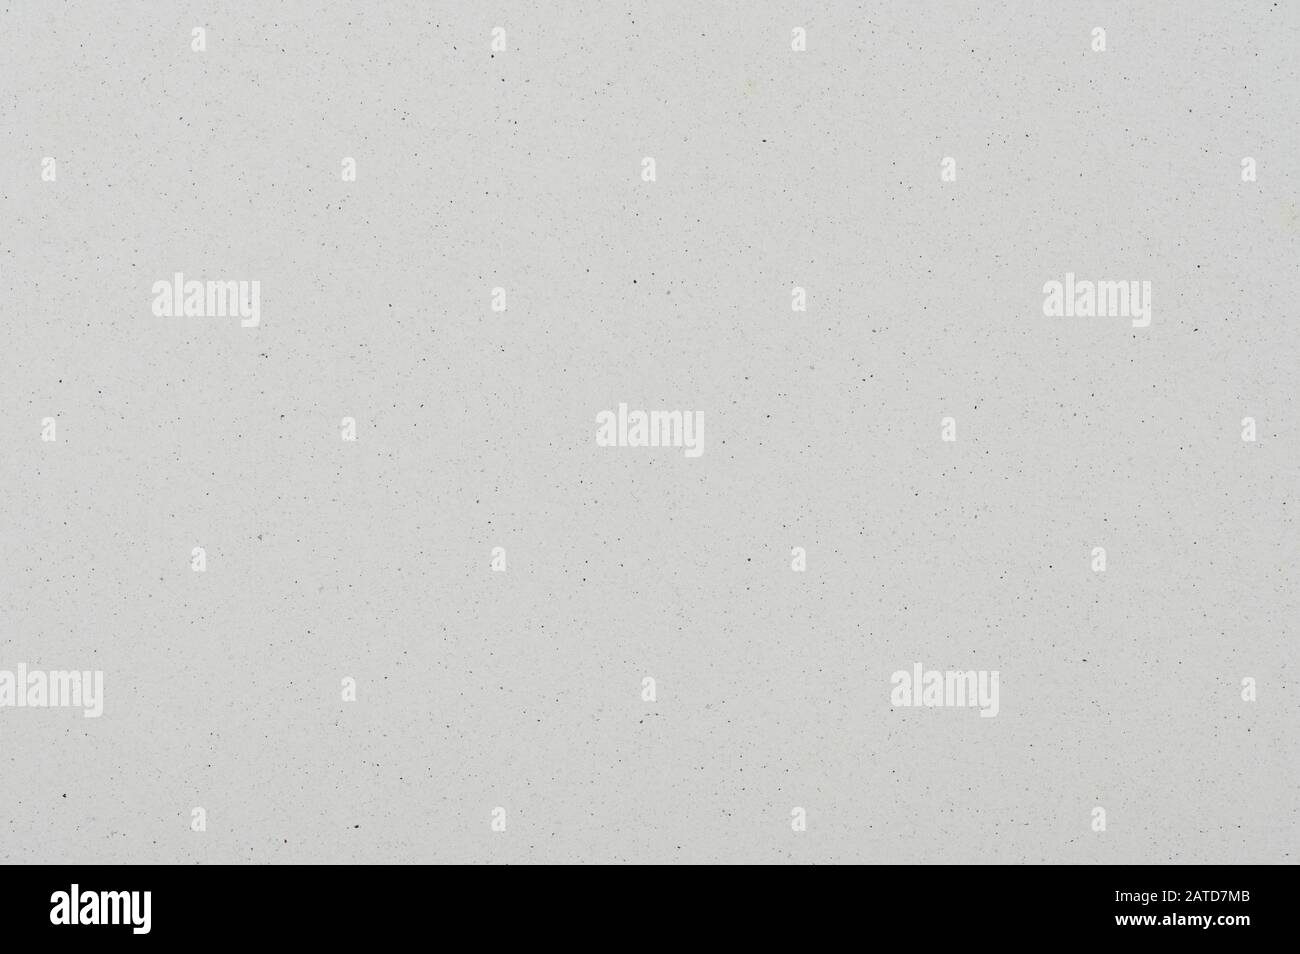 White gray paper texture background with black dots Stock Photo